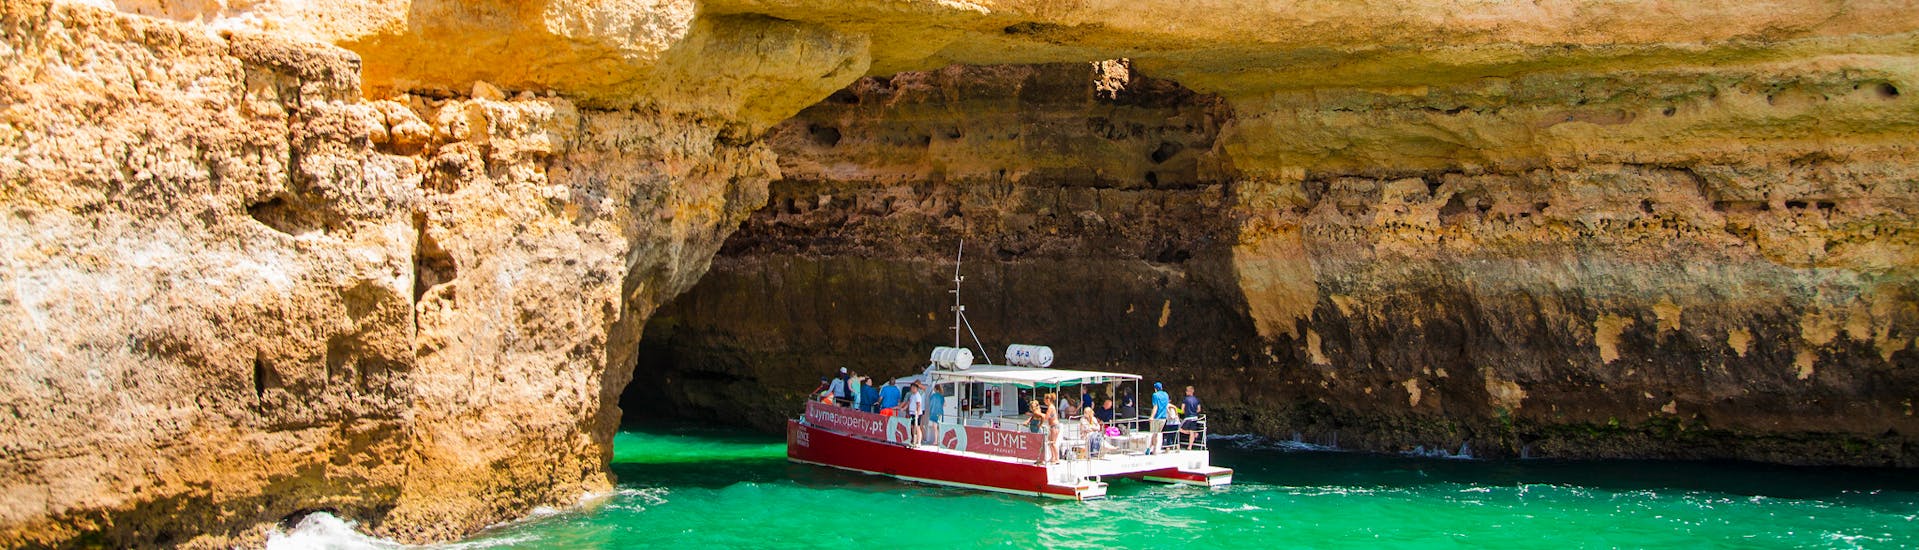 Several boats visiting a cave at the shore during a boat trip.